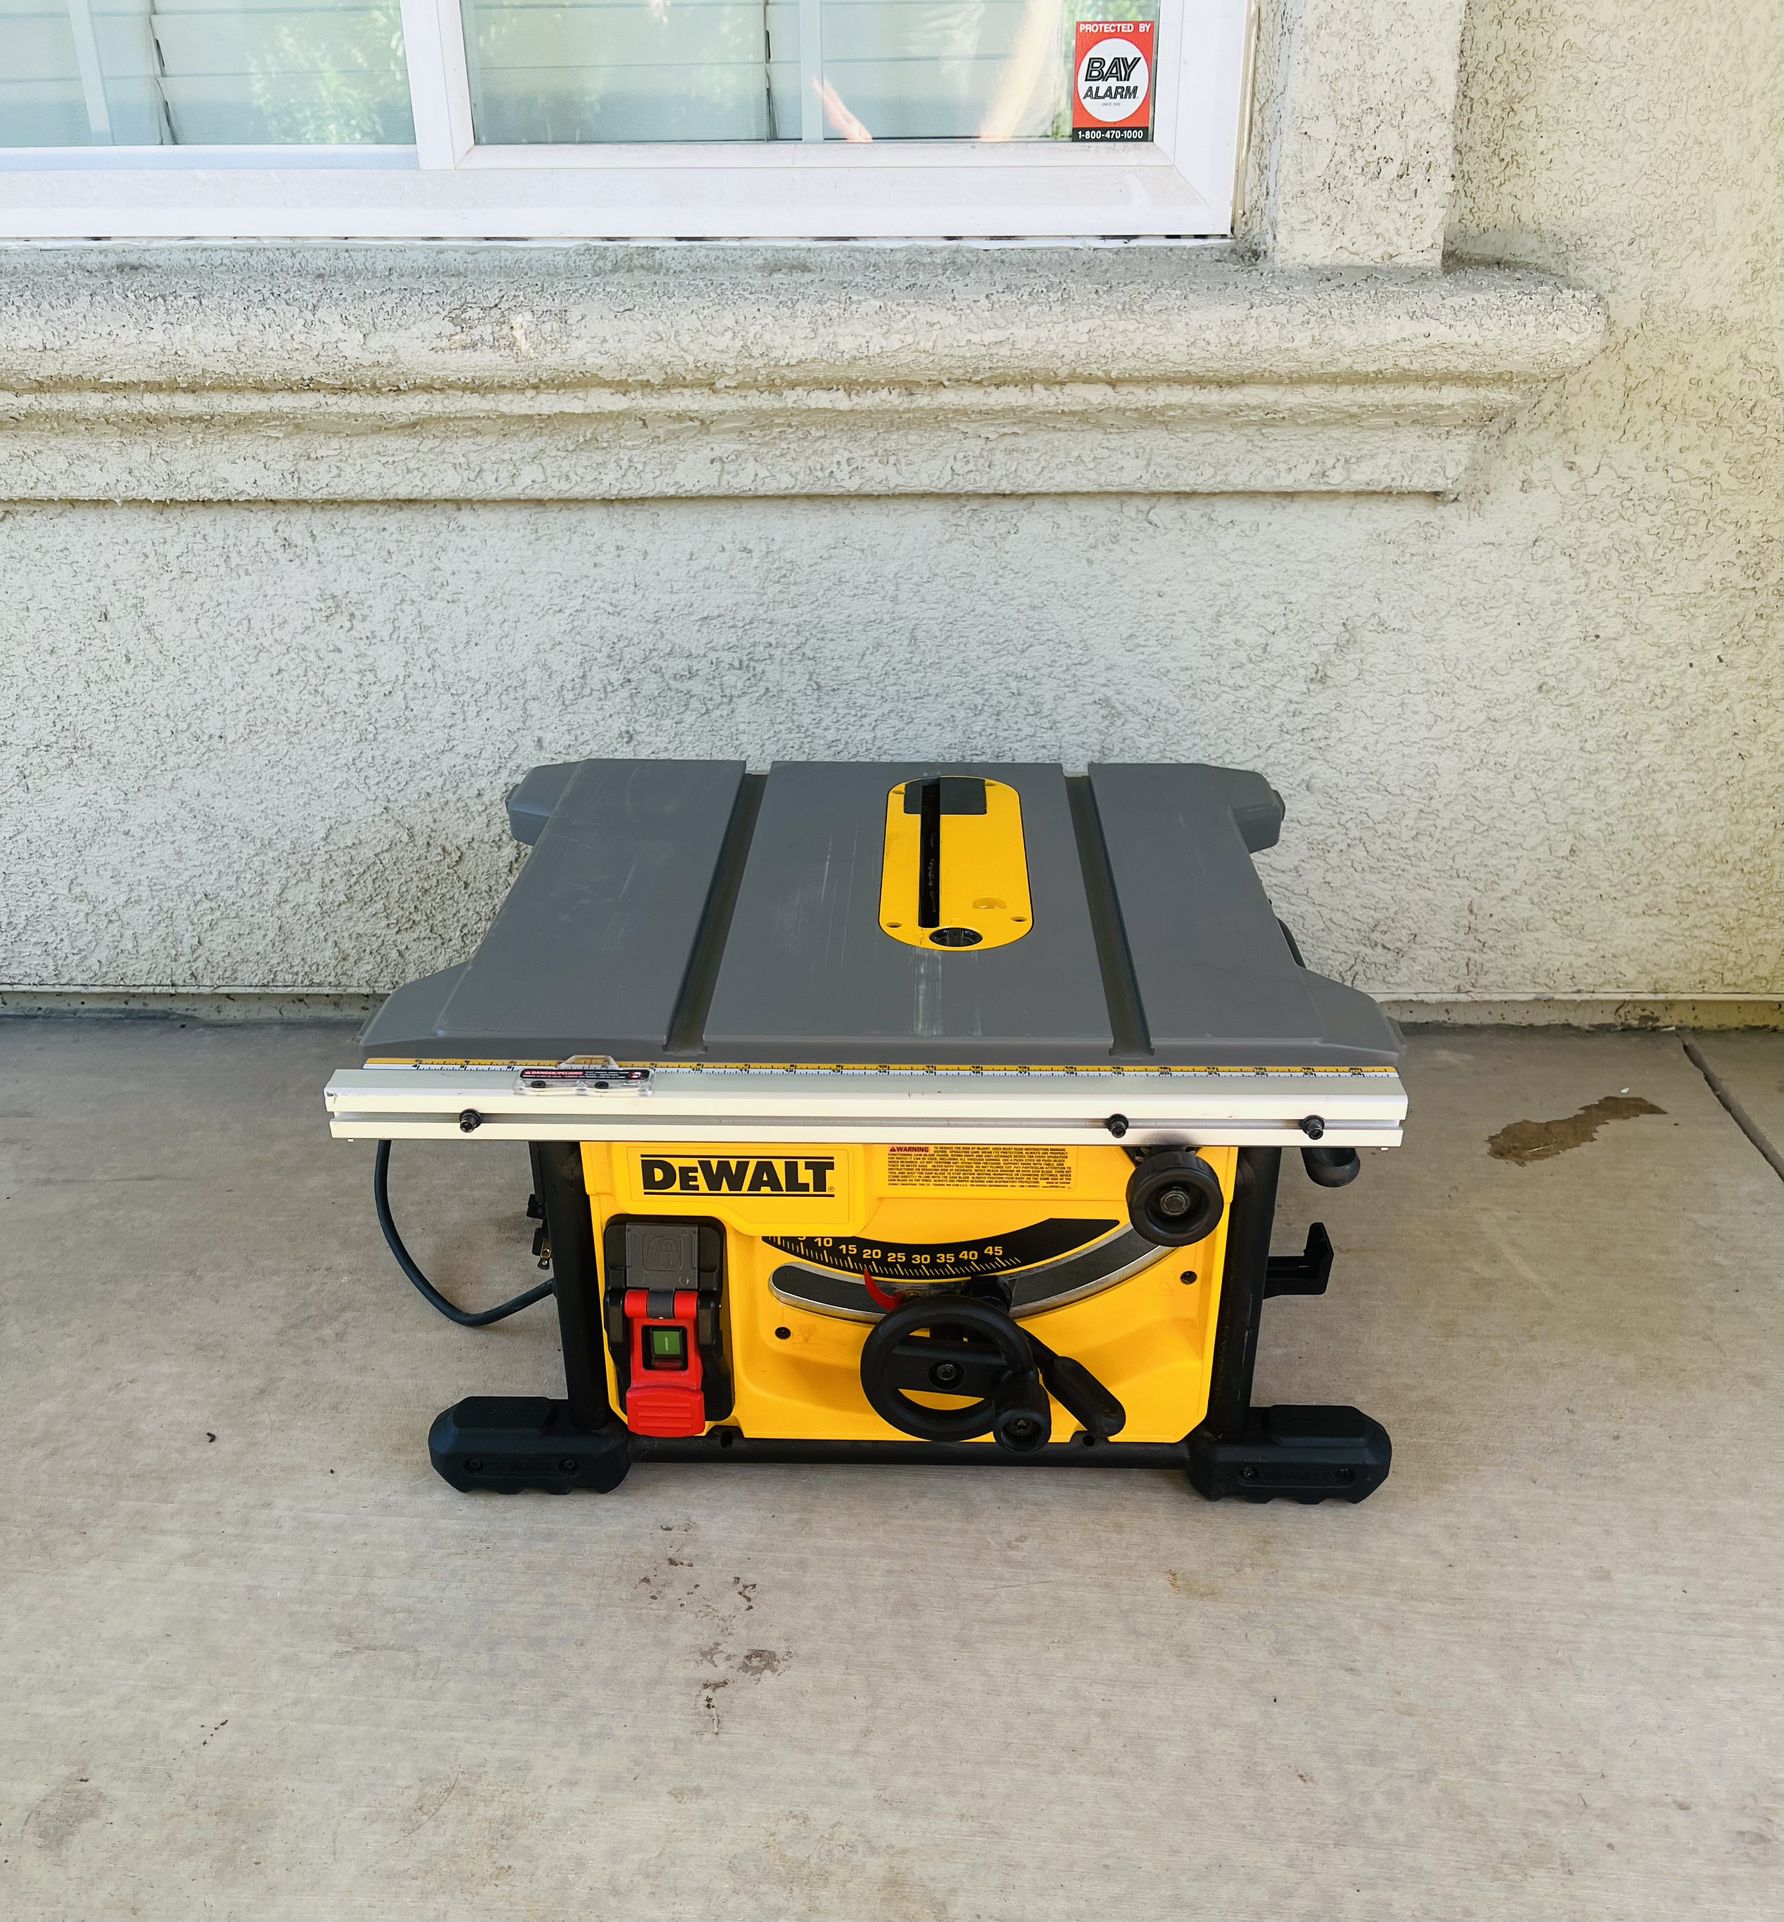 DEWALT 8.25-in Portable Jobsite Table Saw (Tool only) No fence or Guard included